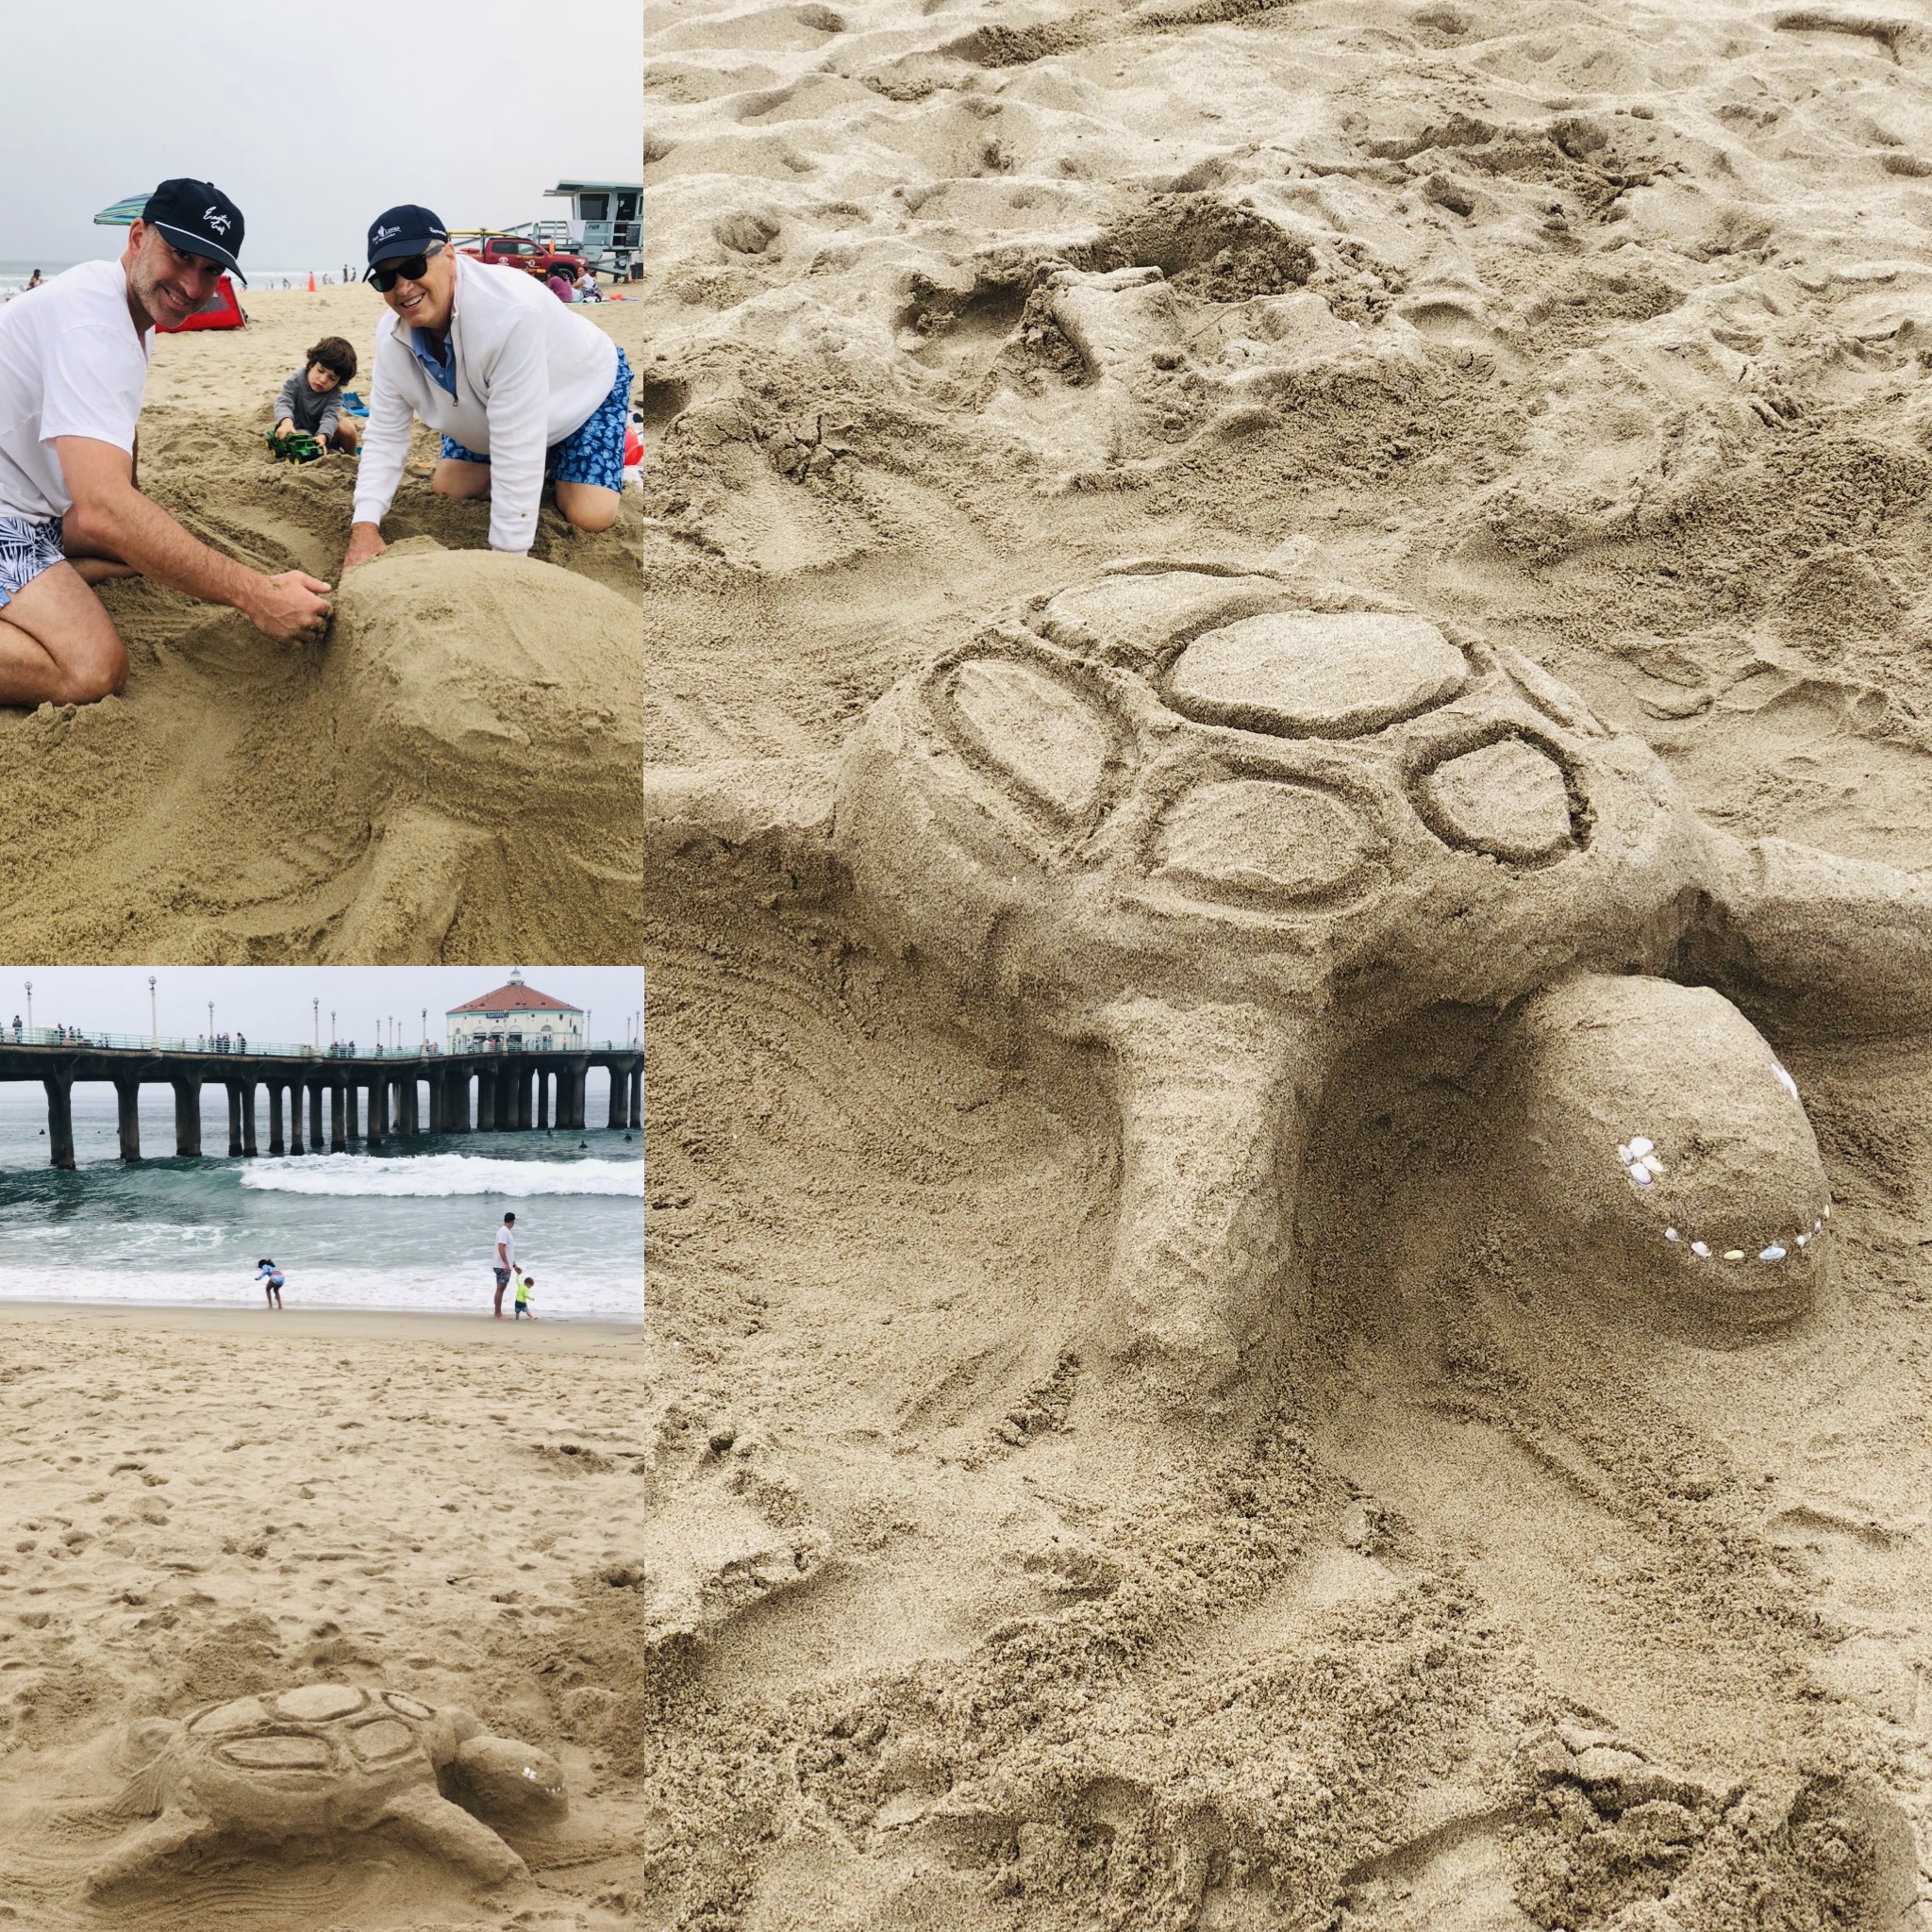 Entry # 10 | Butter the Sea Turtle